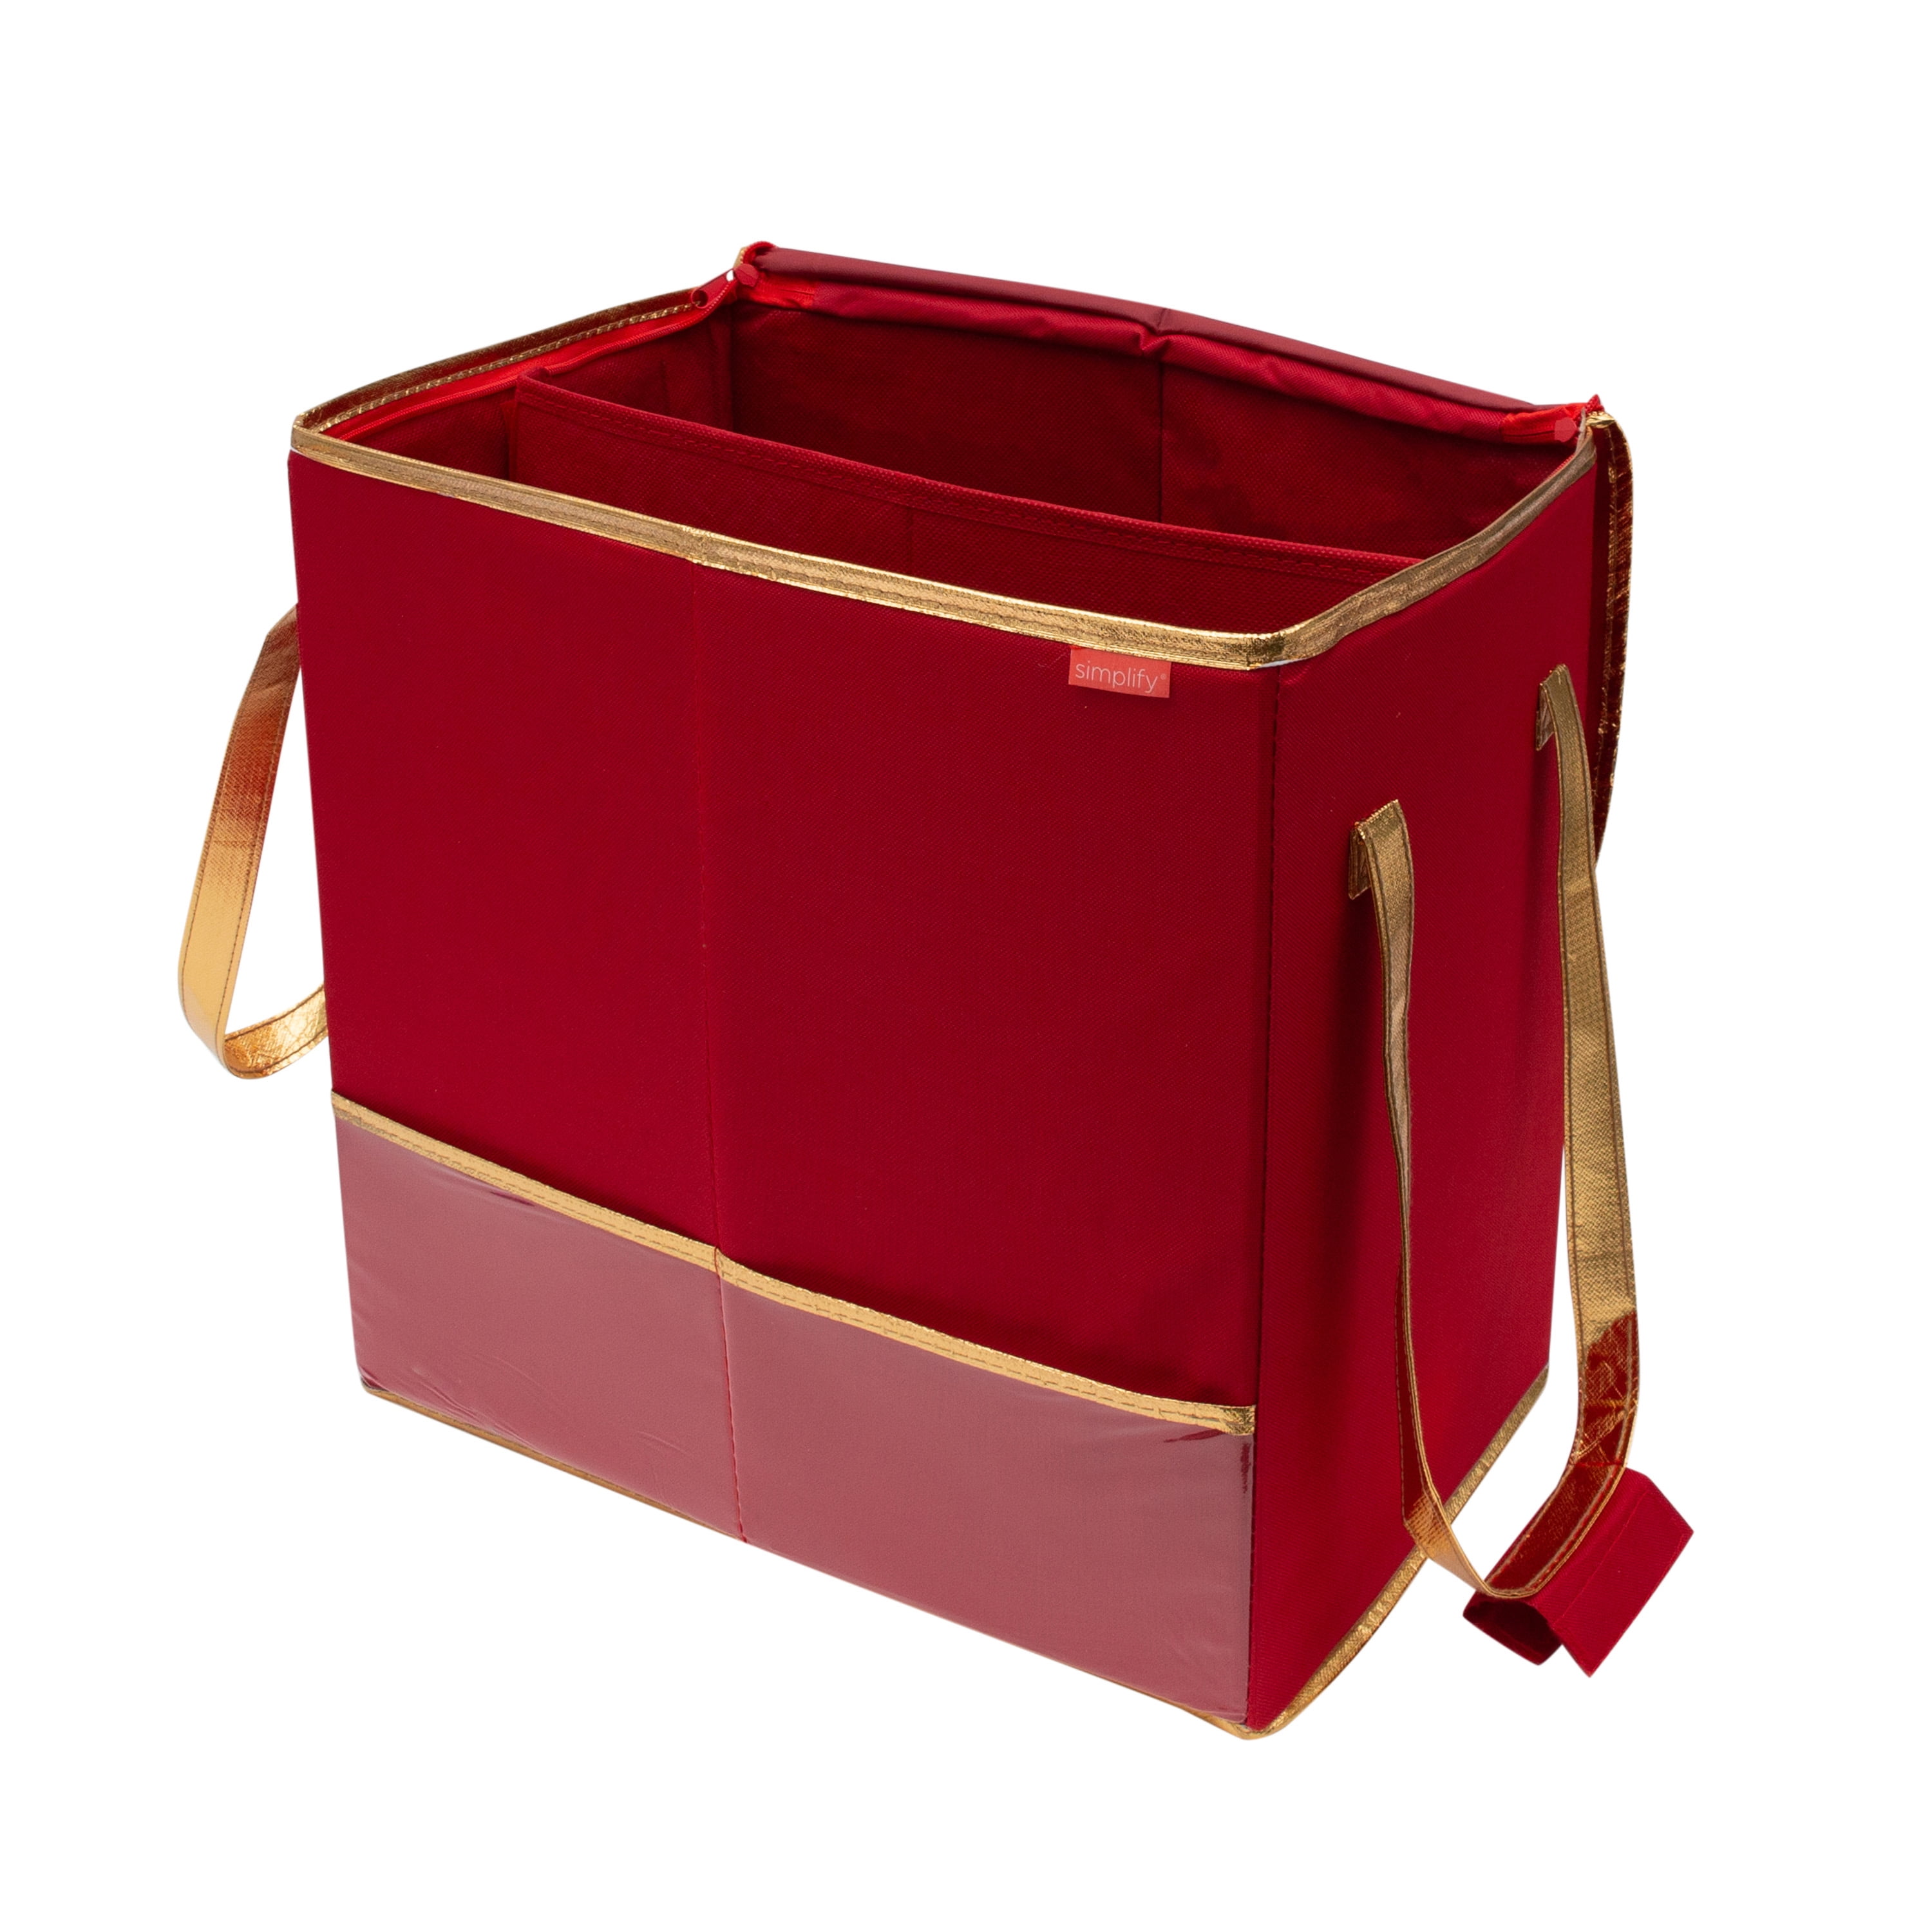 Gift Bag Organizer-20 Storage Tote With 4 Pockets For Wrap, Tissue Paper,  Ribbon, Boxes & Cards-christmas, Birthday By Hastings Home (red) : Target